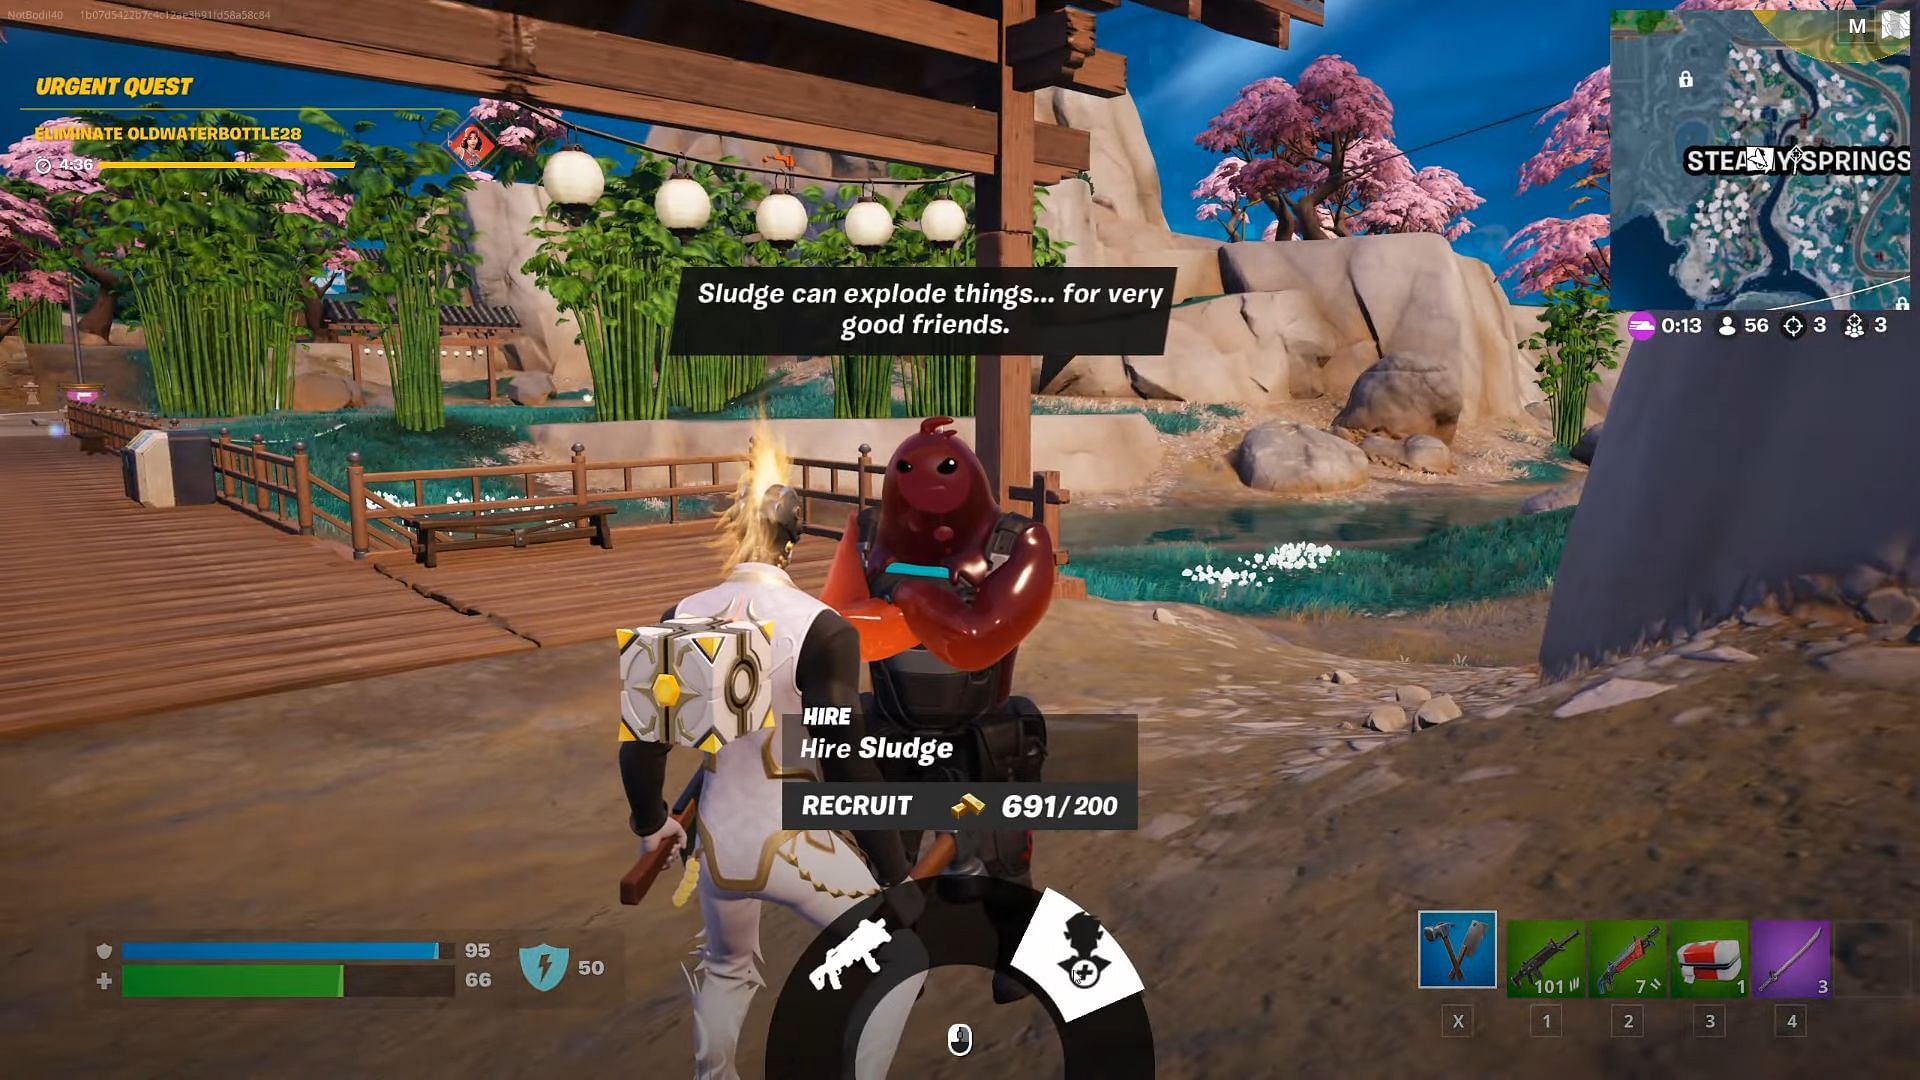 To hire a Specialist Character, simply interact with the Hire button (Image via Epic Games)